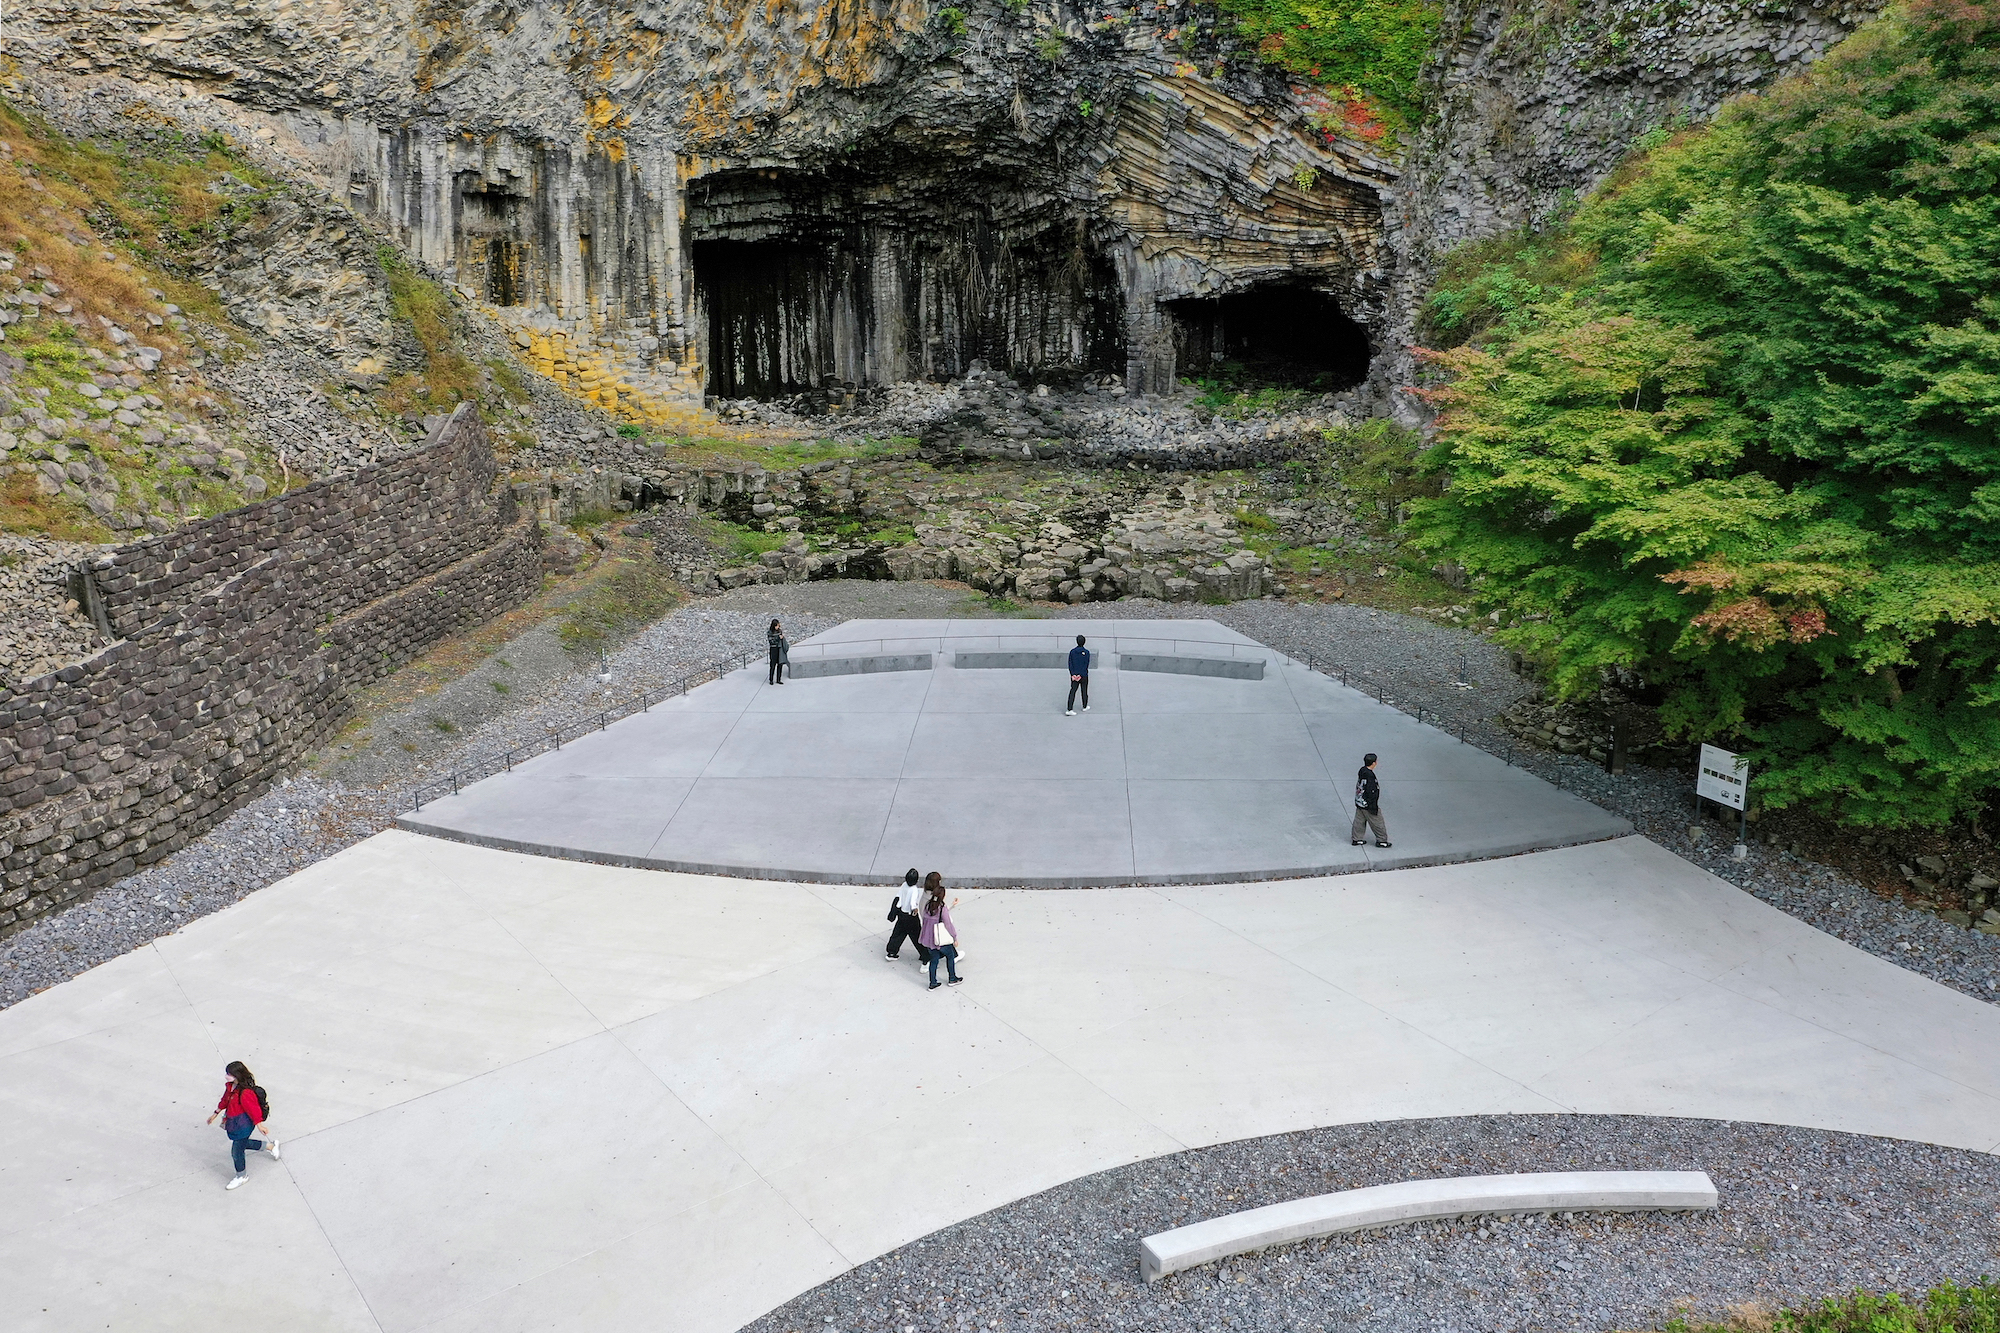 The renovation of the park, which is part of the geopark, incorporated large curves into the flooring. © hiroshi mizusaki